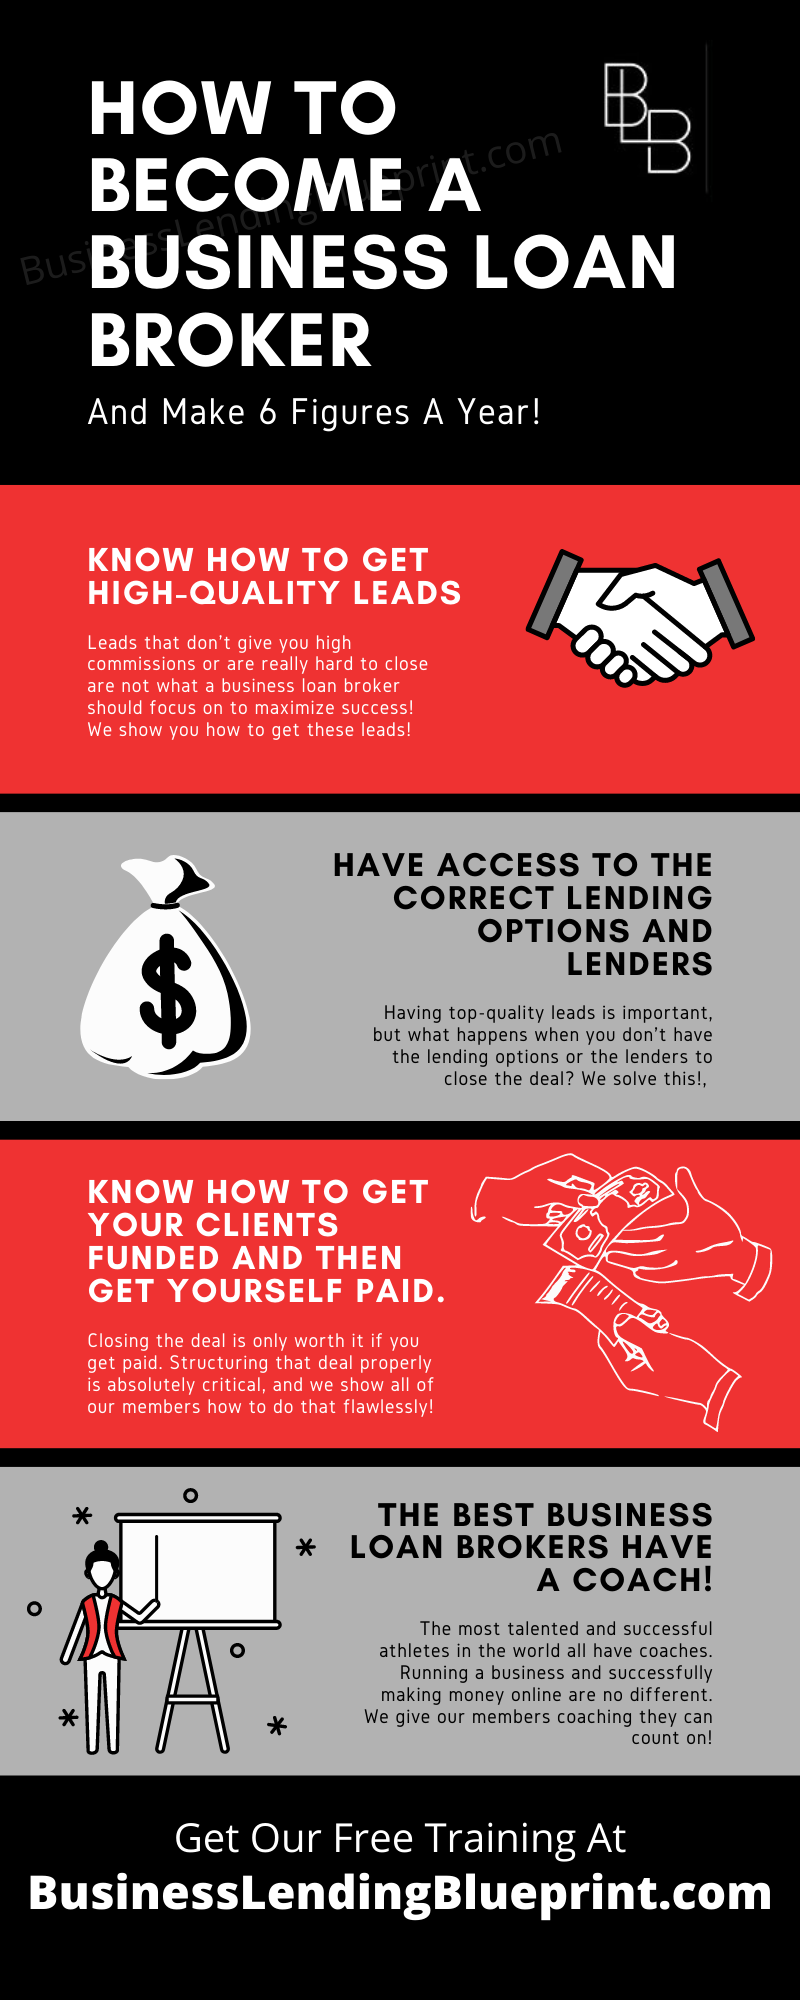 How to become a business loan broker infographic